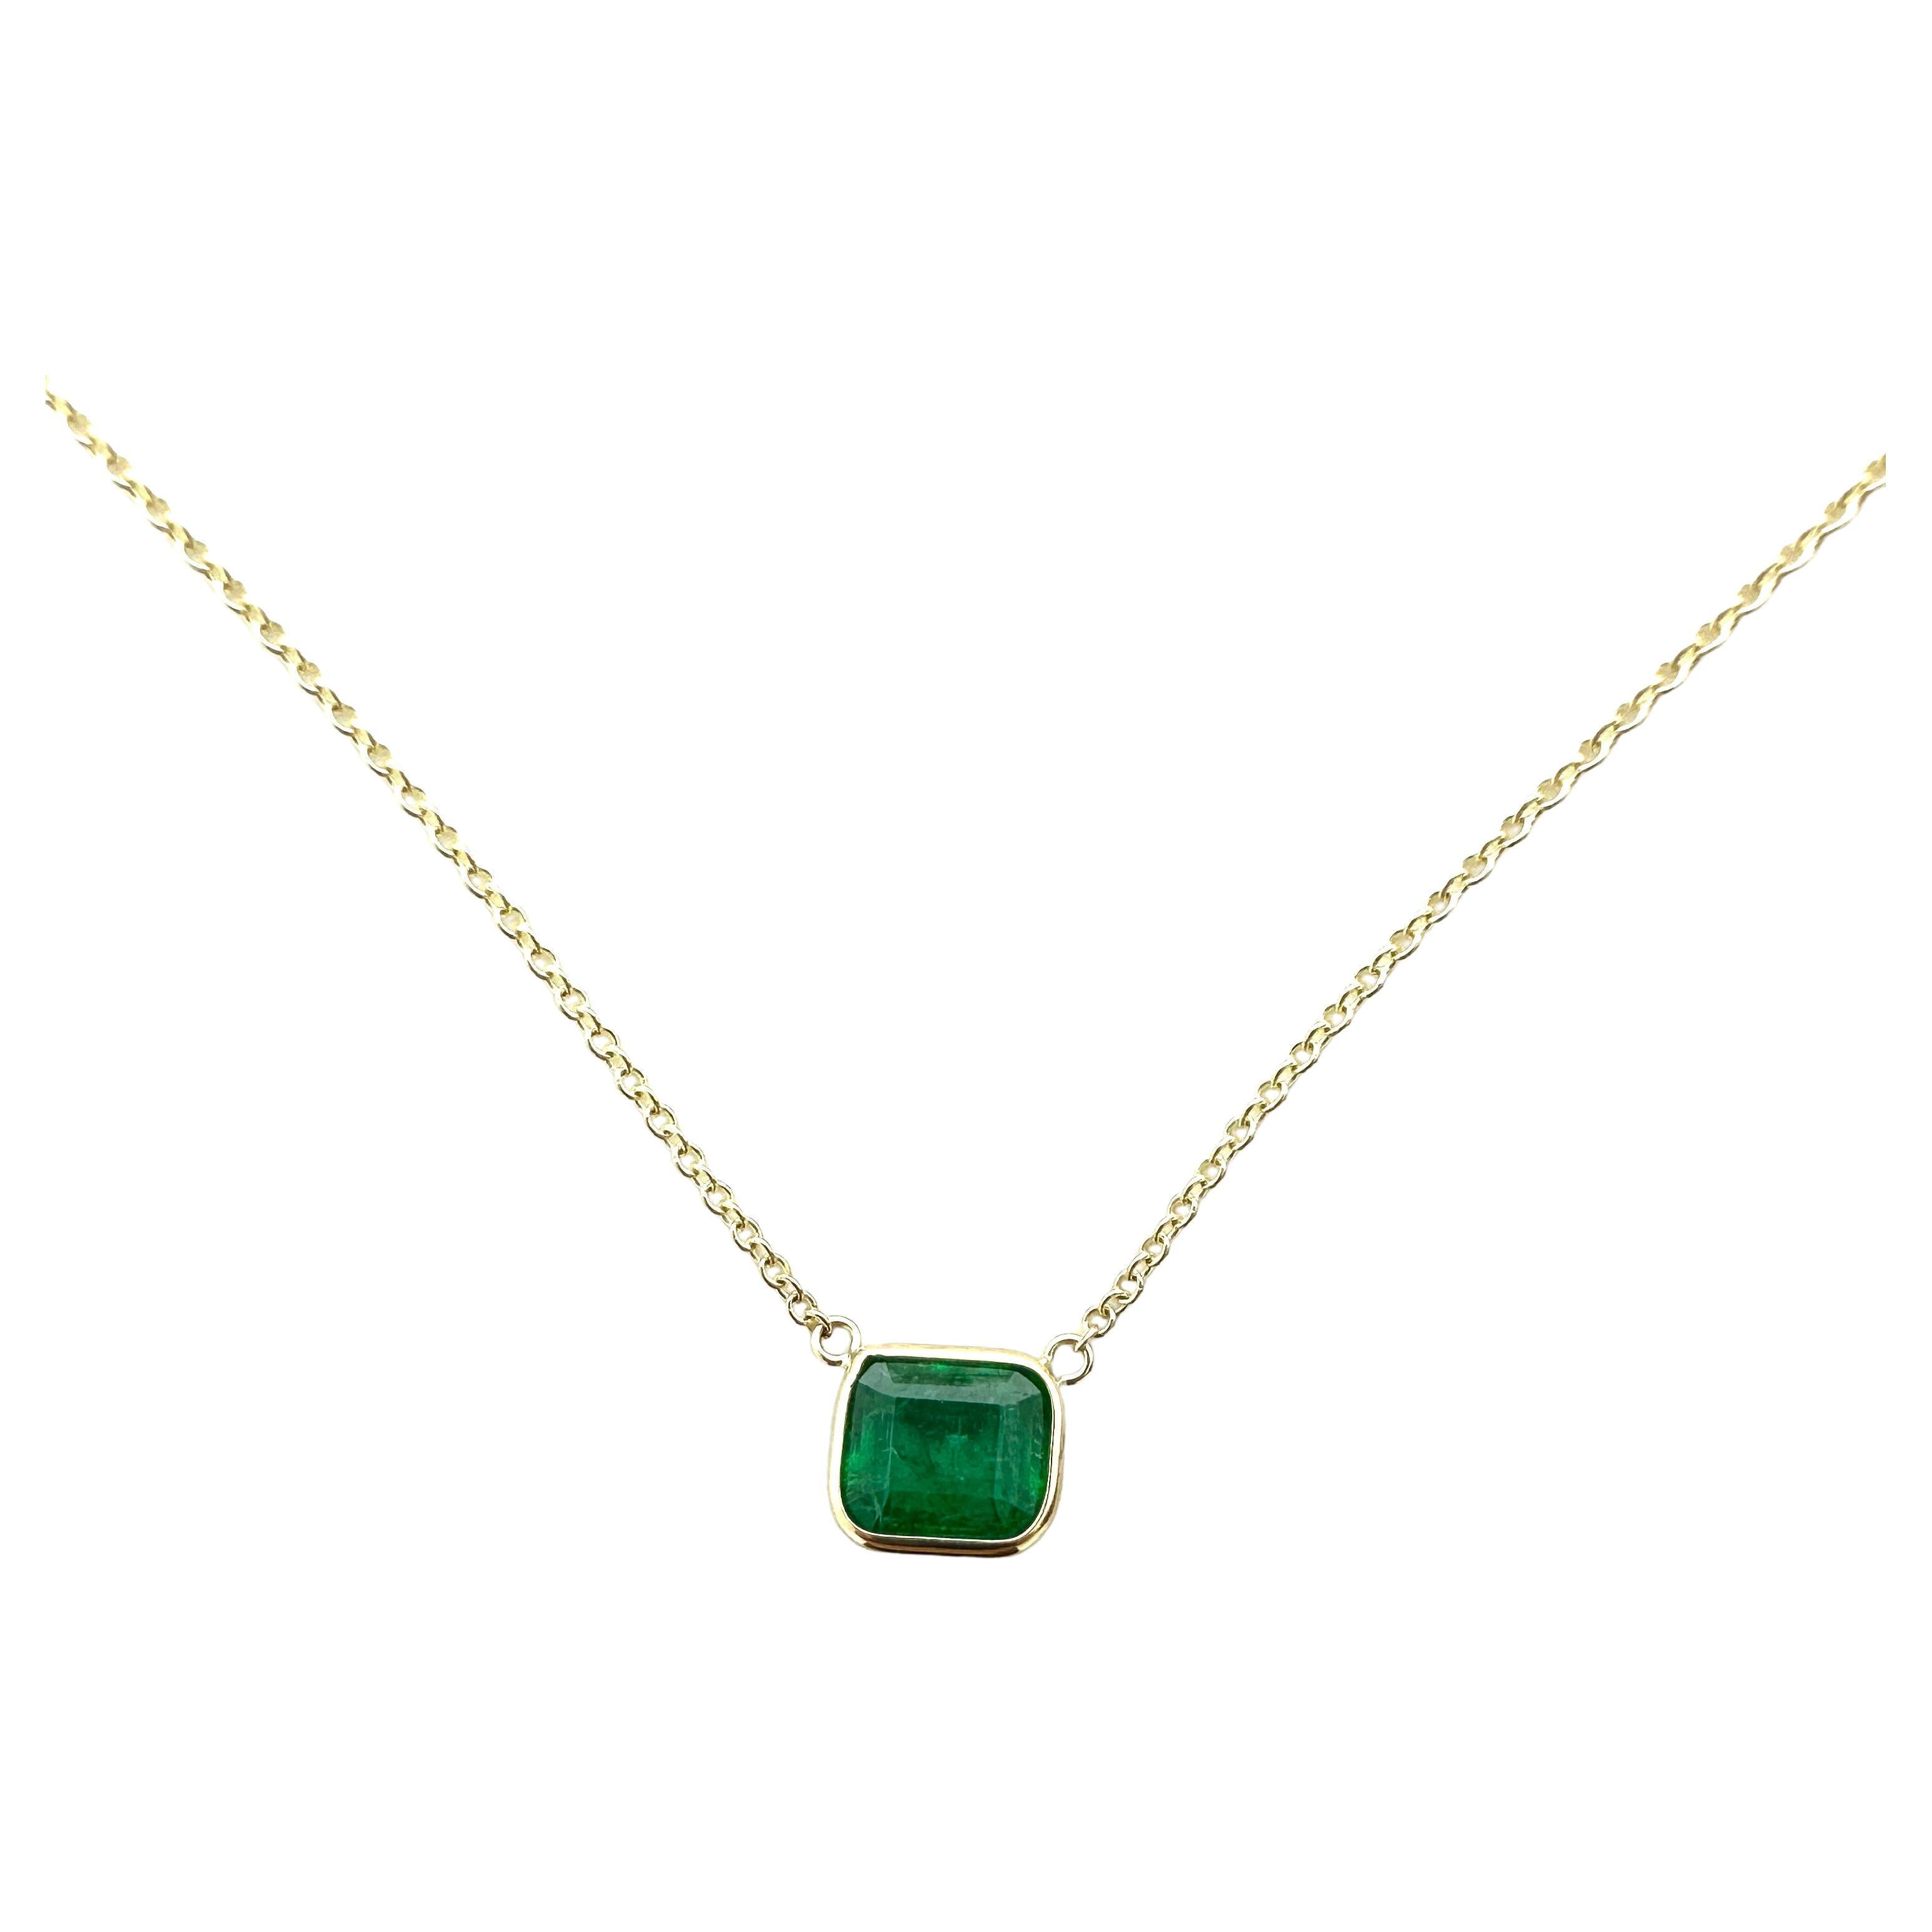 1.88 Carat Emerald Cut & Fashion Necklaces In 14K Yellow Gold For Sale